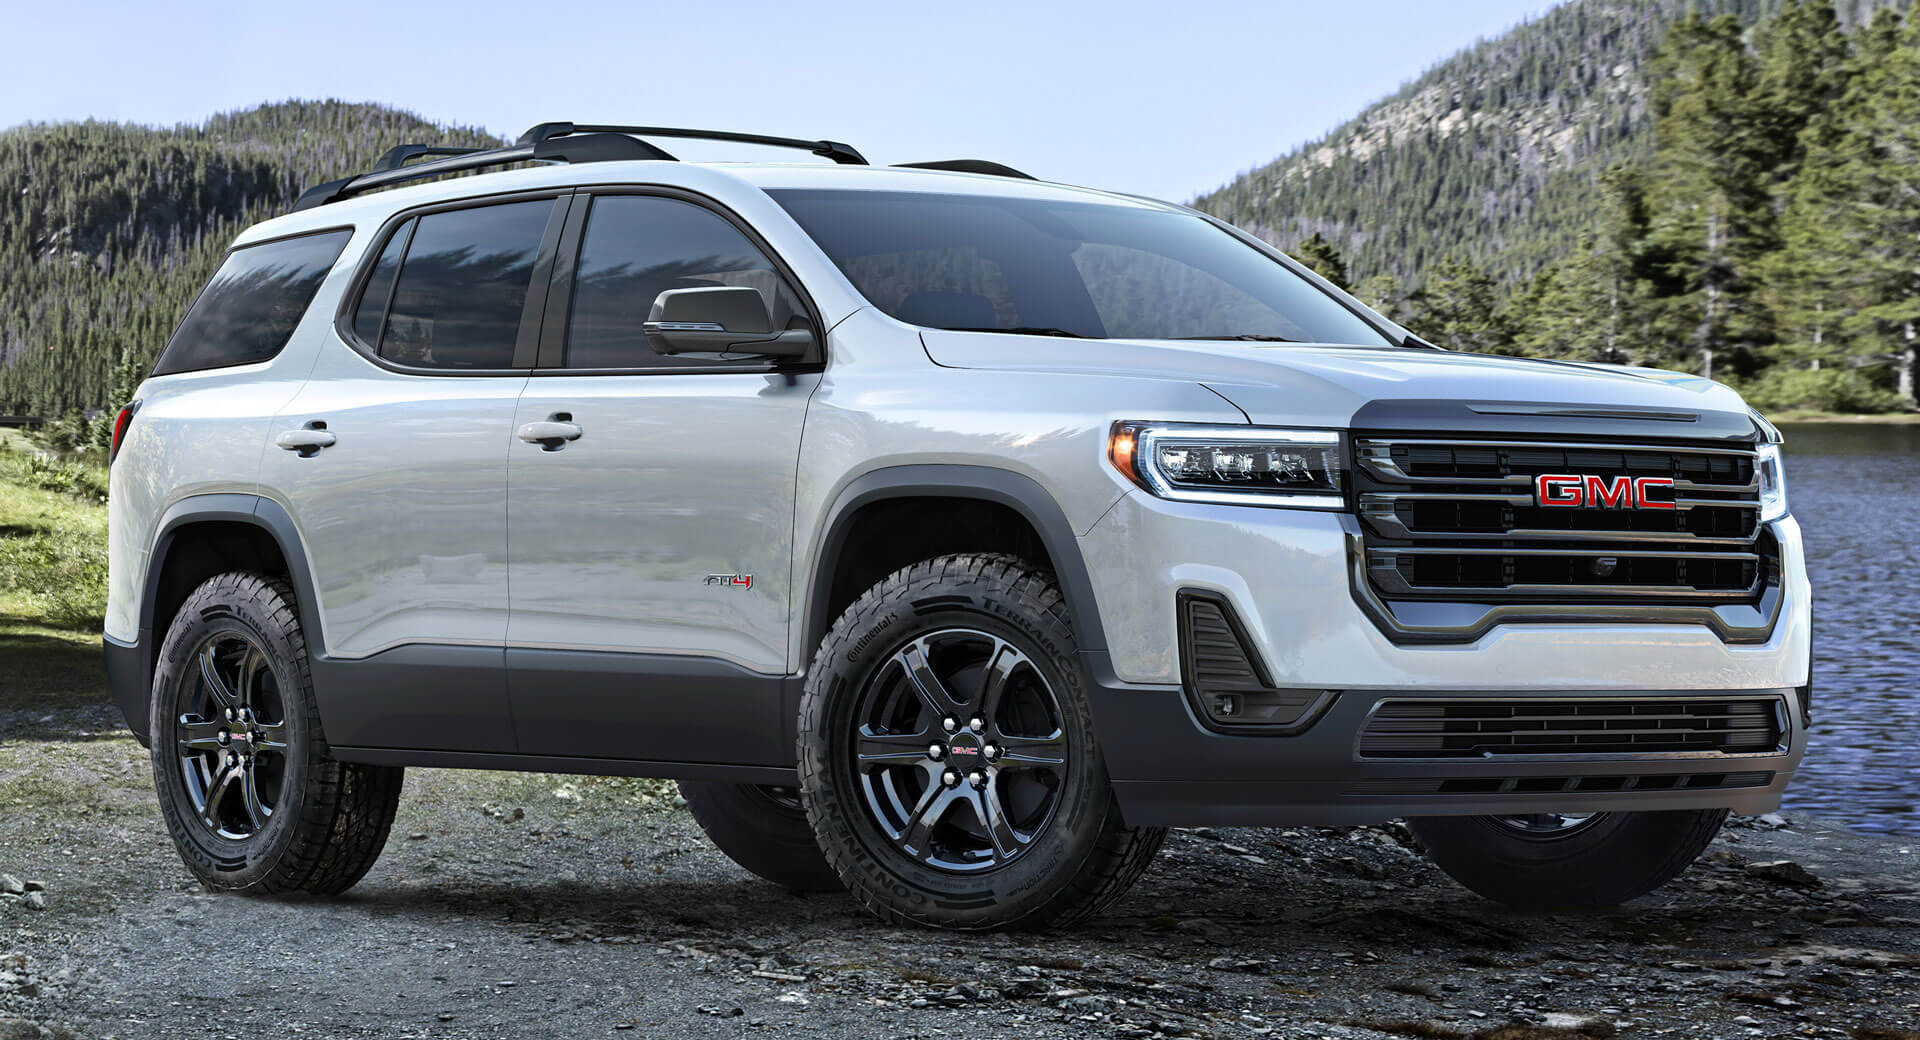 2020 GMC Acadia Unveiled With New 230 HP 2.0L Engine, 9 ...